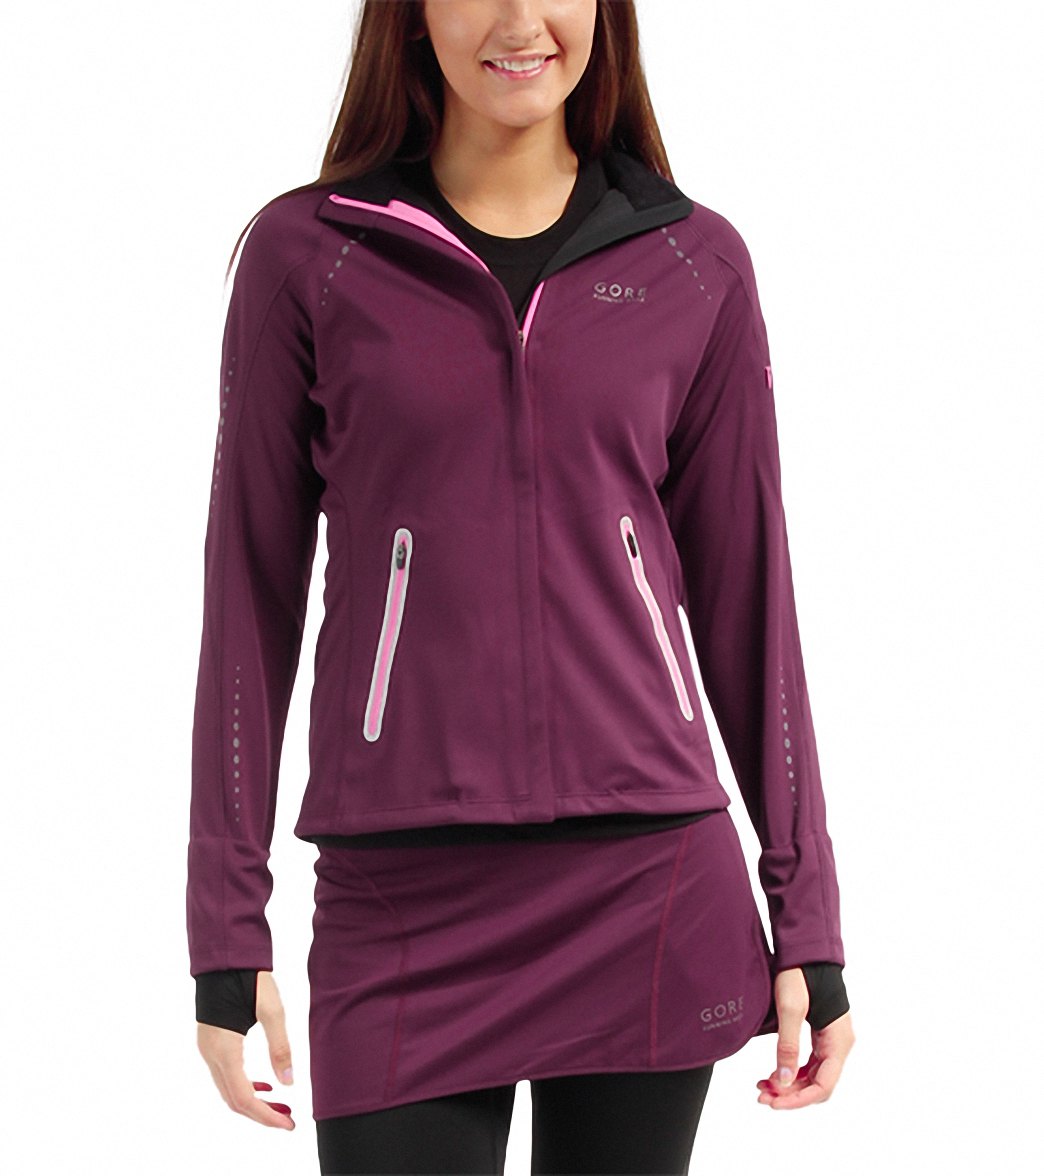 Gore Women's Mythos So Lady Running Jacket - Shiraz Red/Hot Pink Xl Polyester - Swimoutlet.com